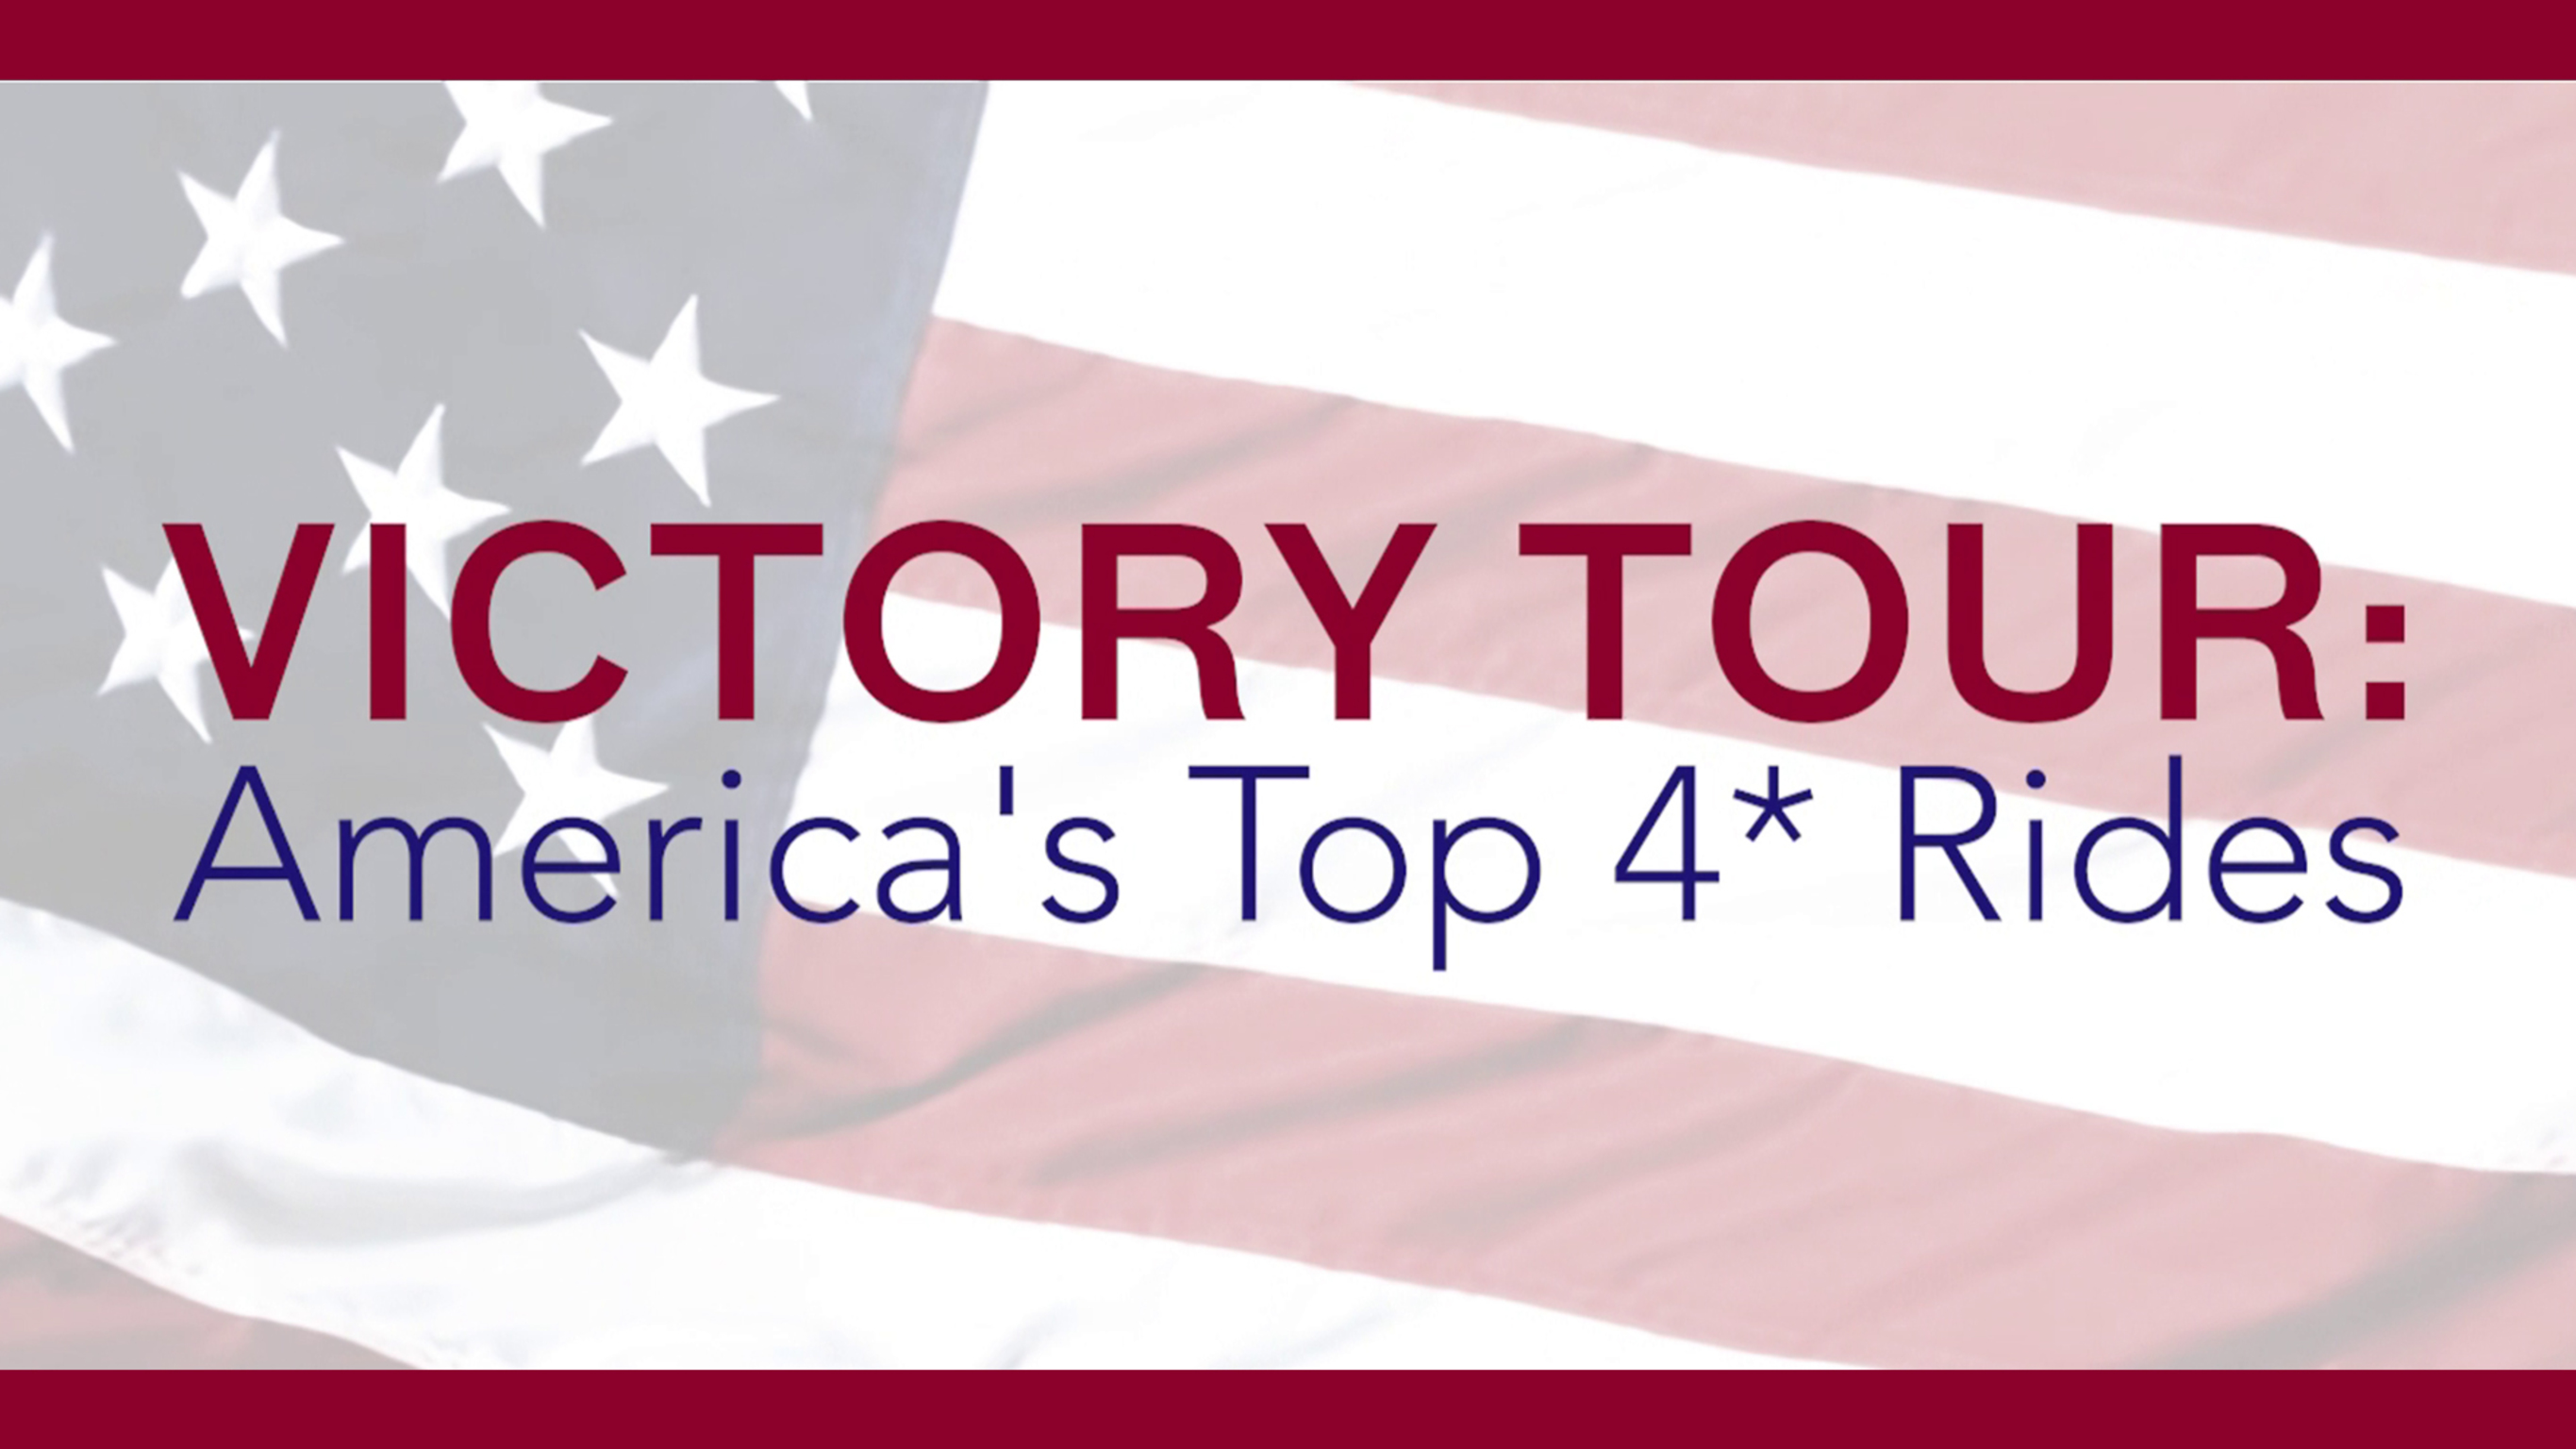 Victory Tour: America's Top 4*